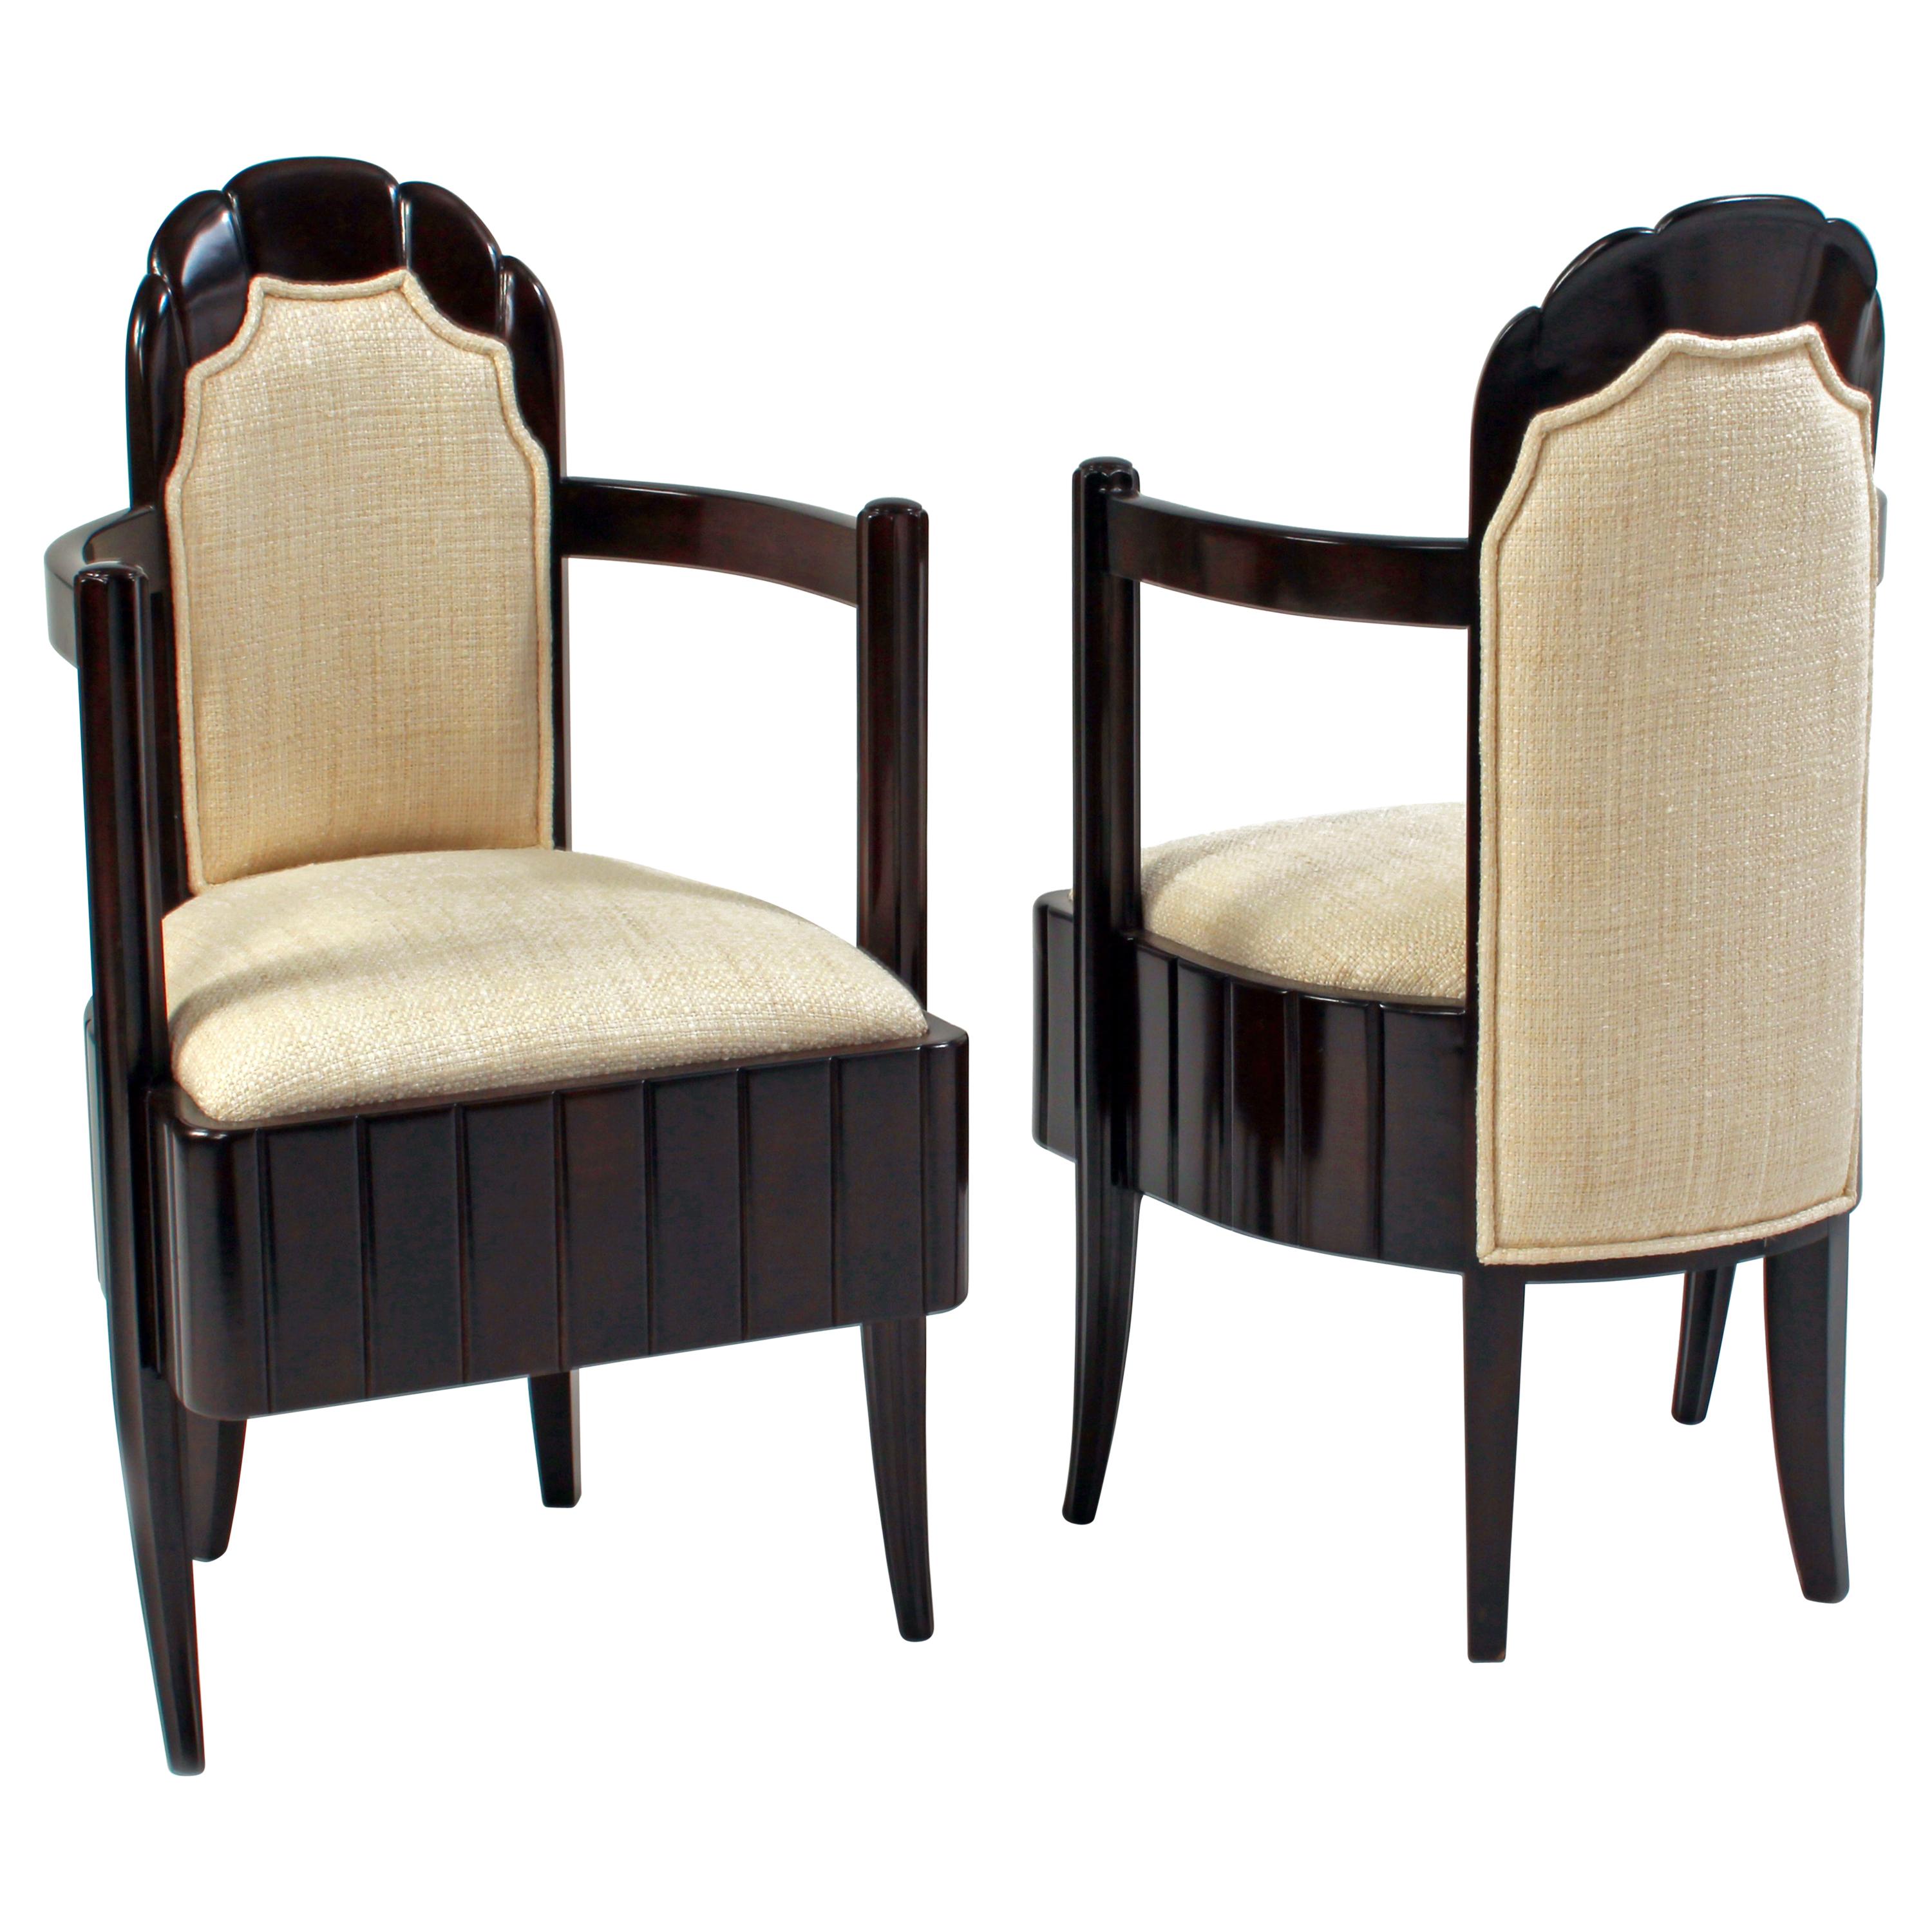 Pair of Art Deco Chairs from the Ocean Liner Ile-de-France